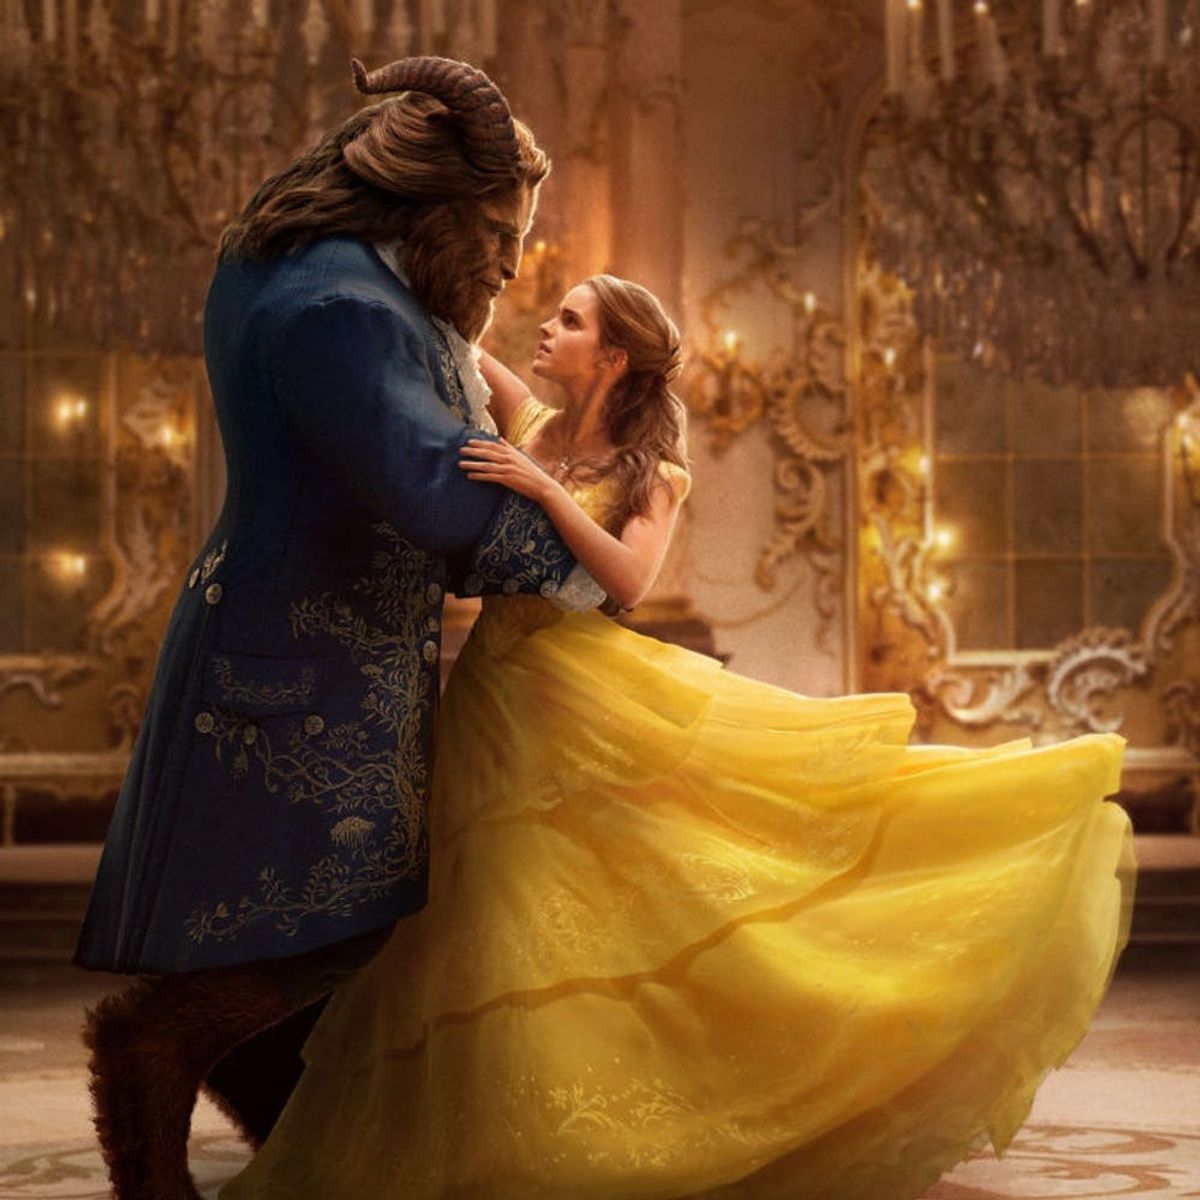 Ariana Grande and John Legend’s Beauty and the Beast Music Video Is Pure Fairy-Tale Magic